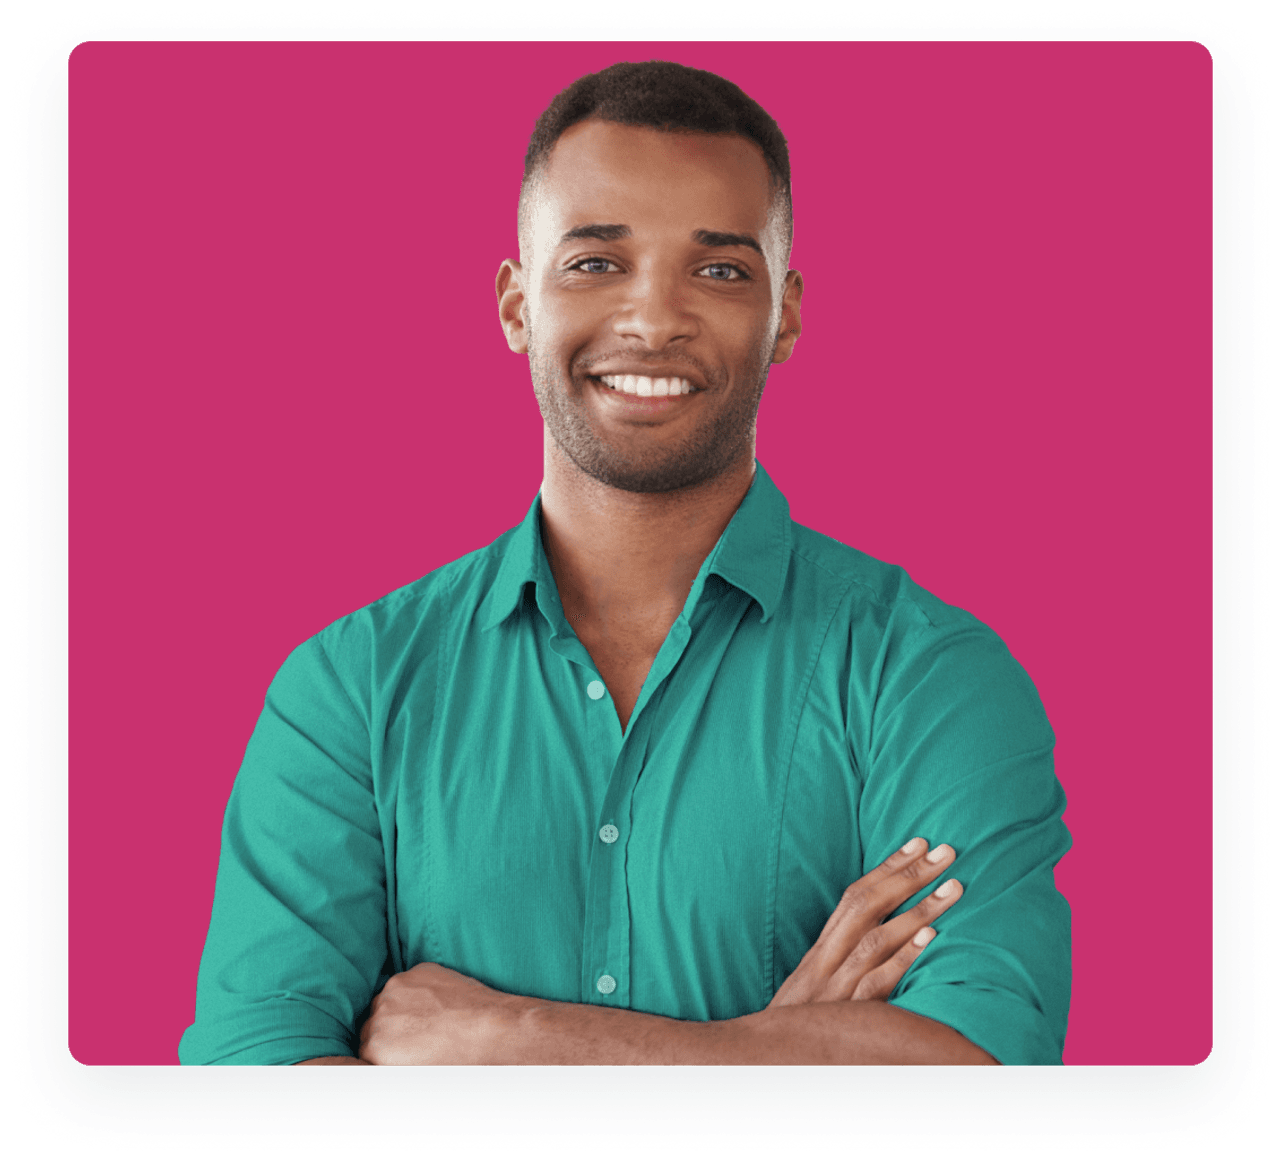 African American man on pink background